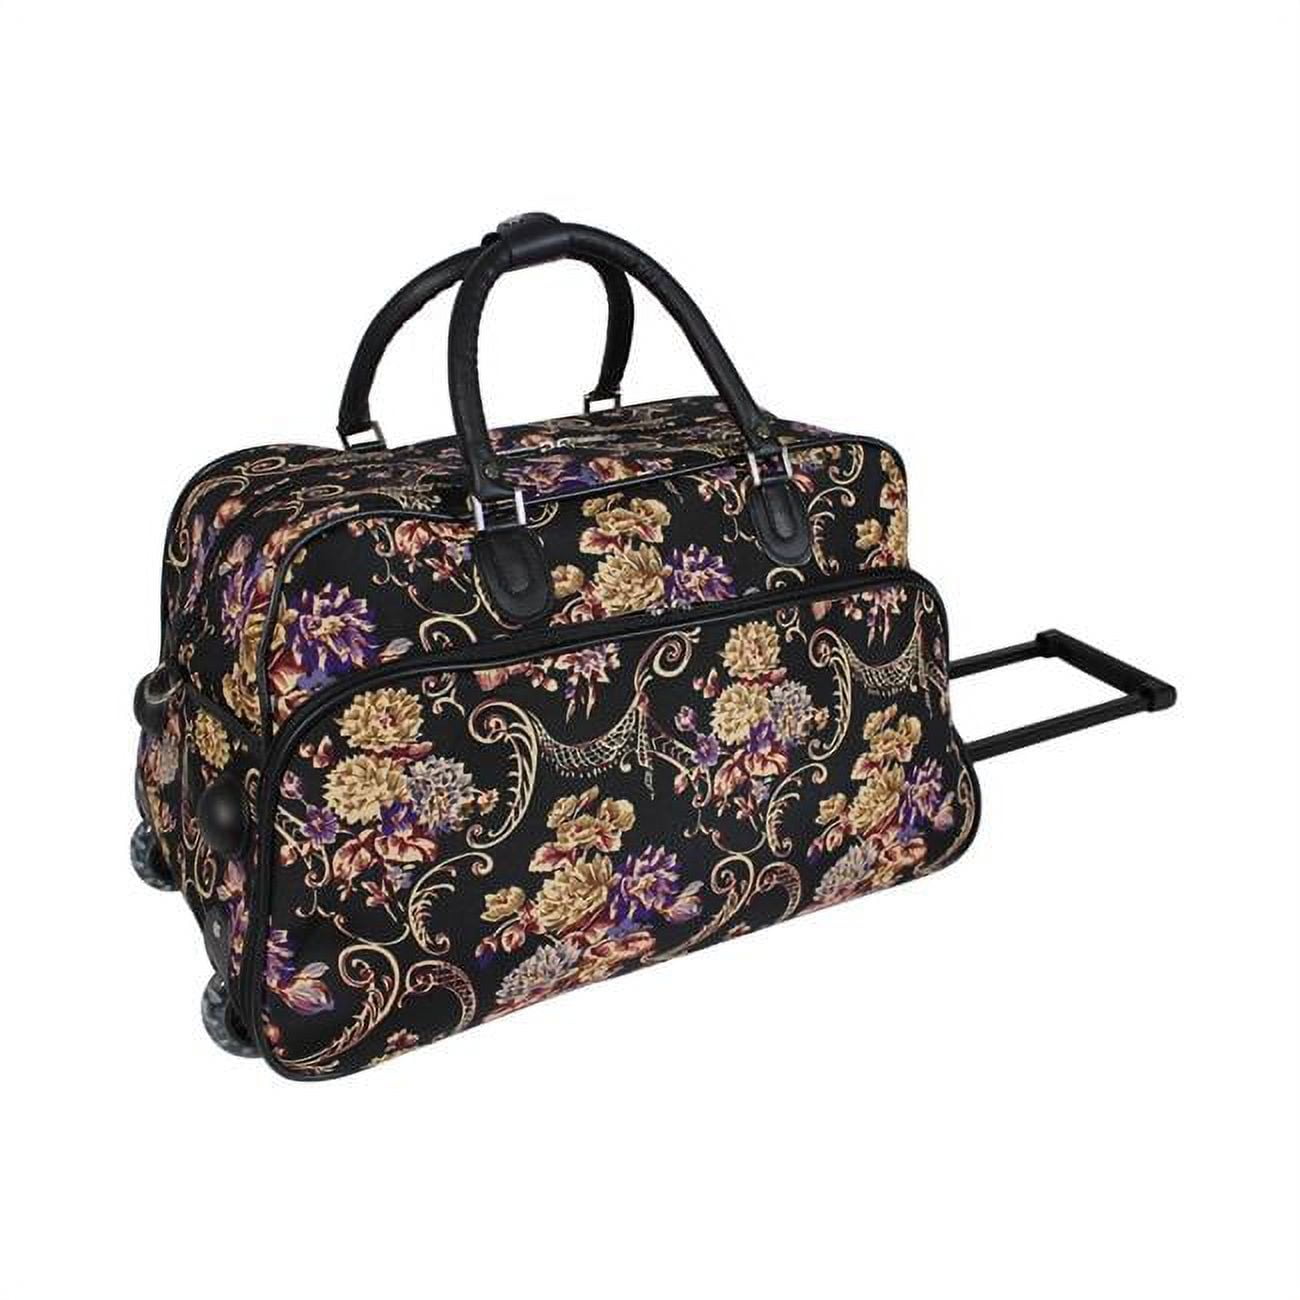 World Traveler 21-Inch Carry-On Rolling Duffel Bag - Classic Floral 